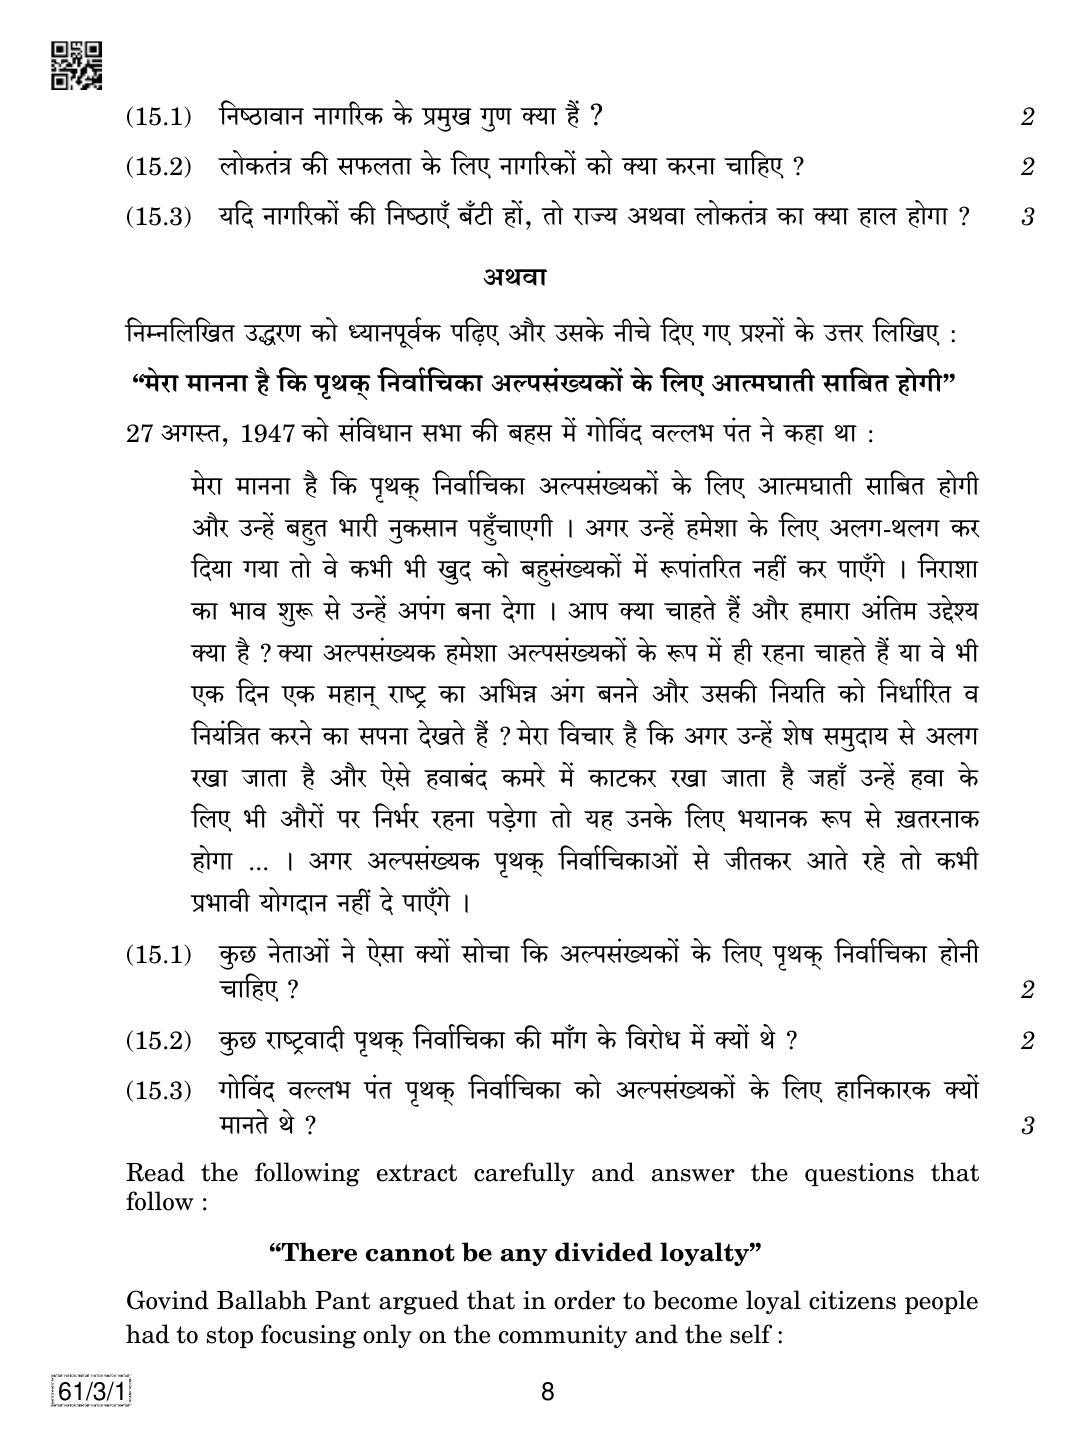 CBSE Class 12 61-3-1 History 2019 Question Paper - Page 8